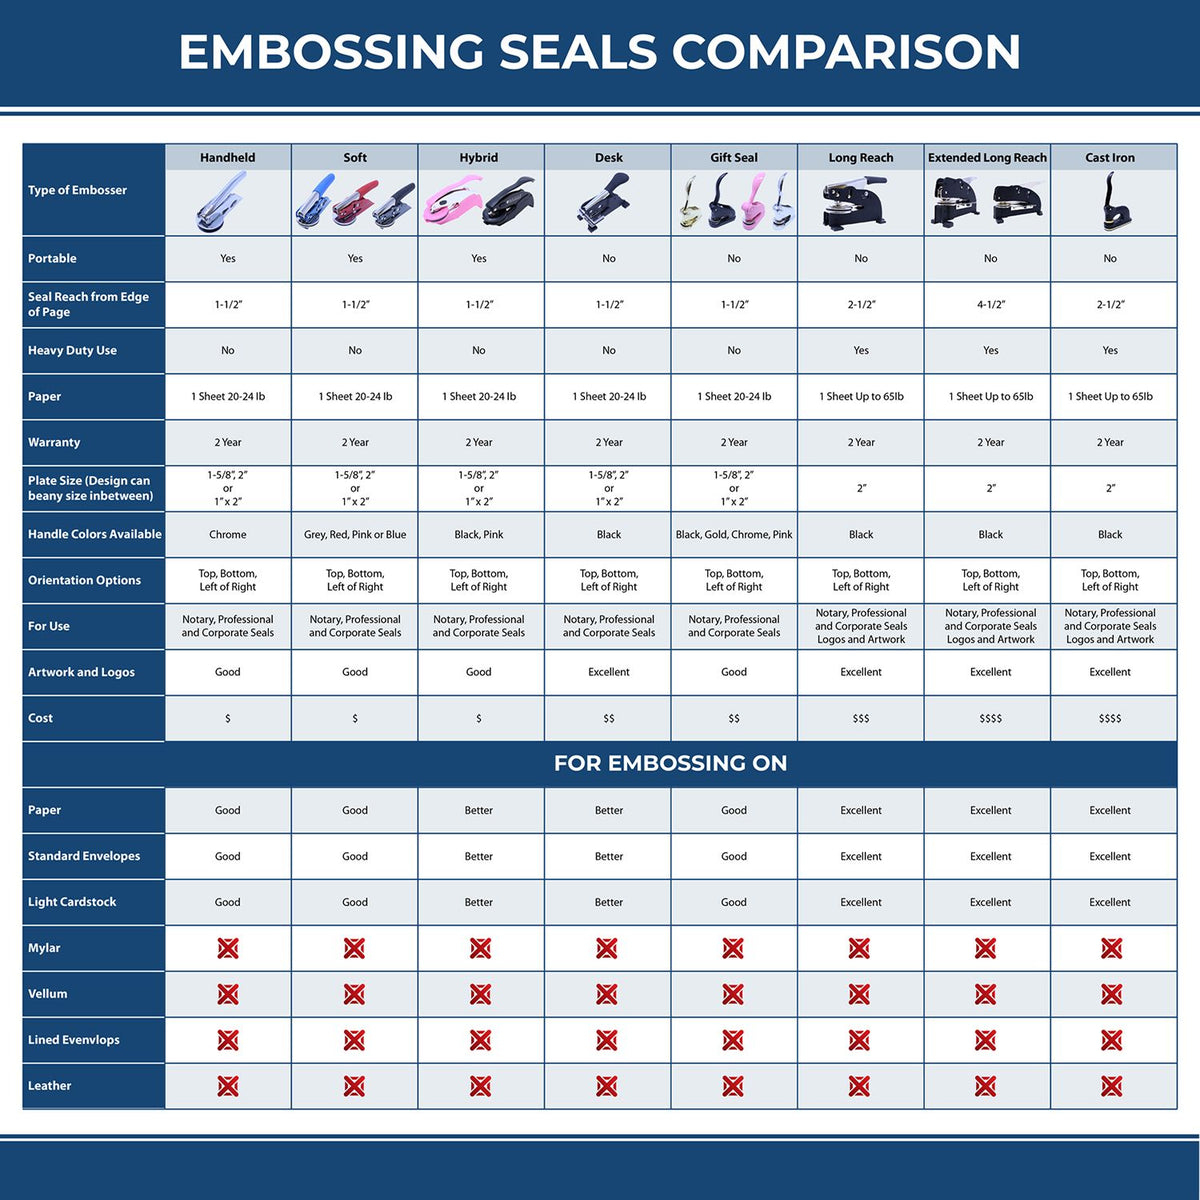 A comparison chart for the different types of mount models available for the Long Reach Pennsylvania PE Seal.